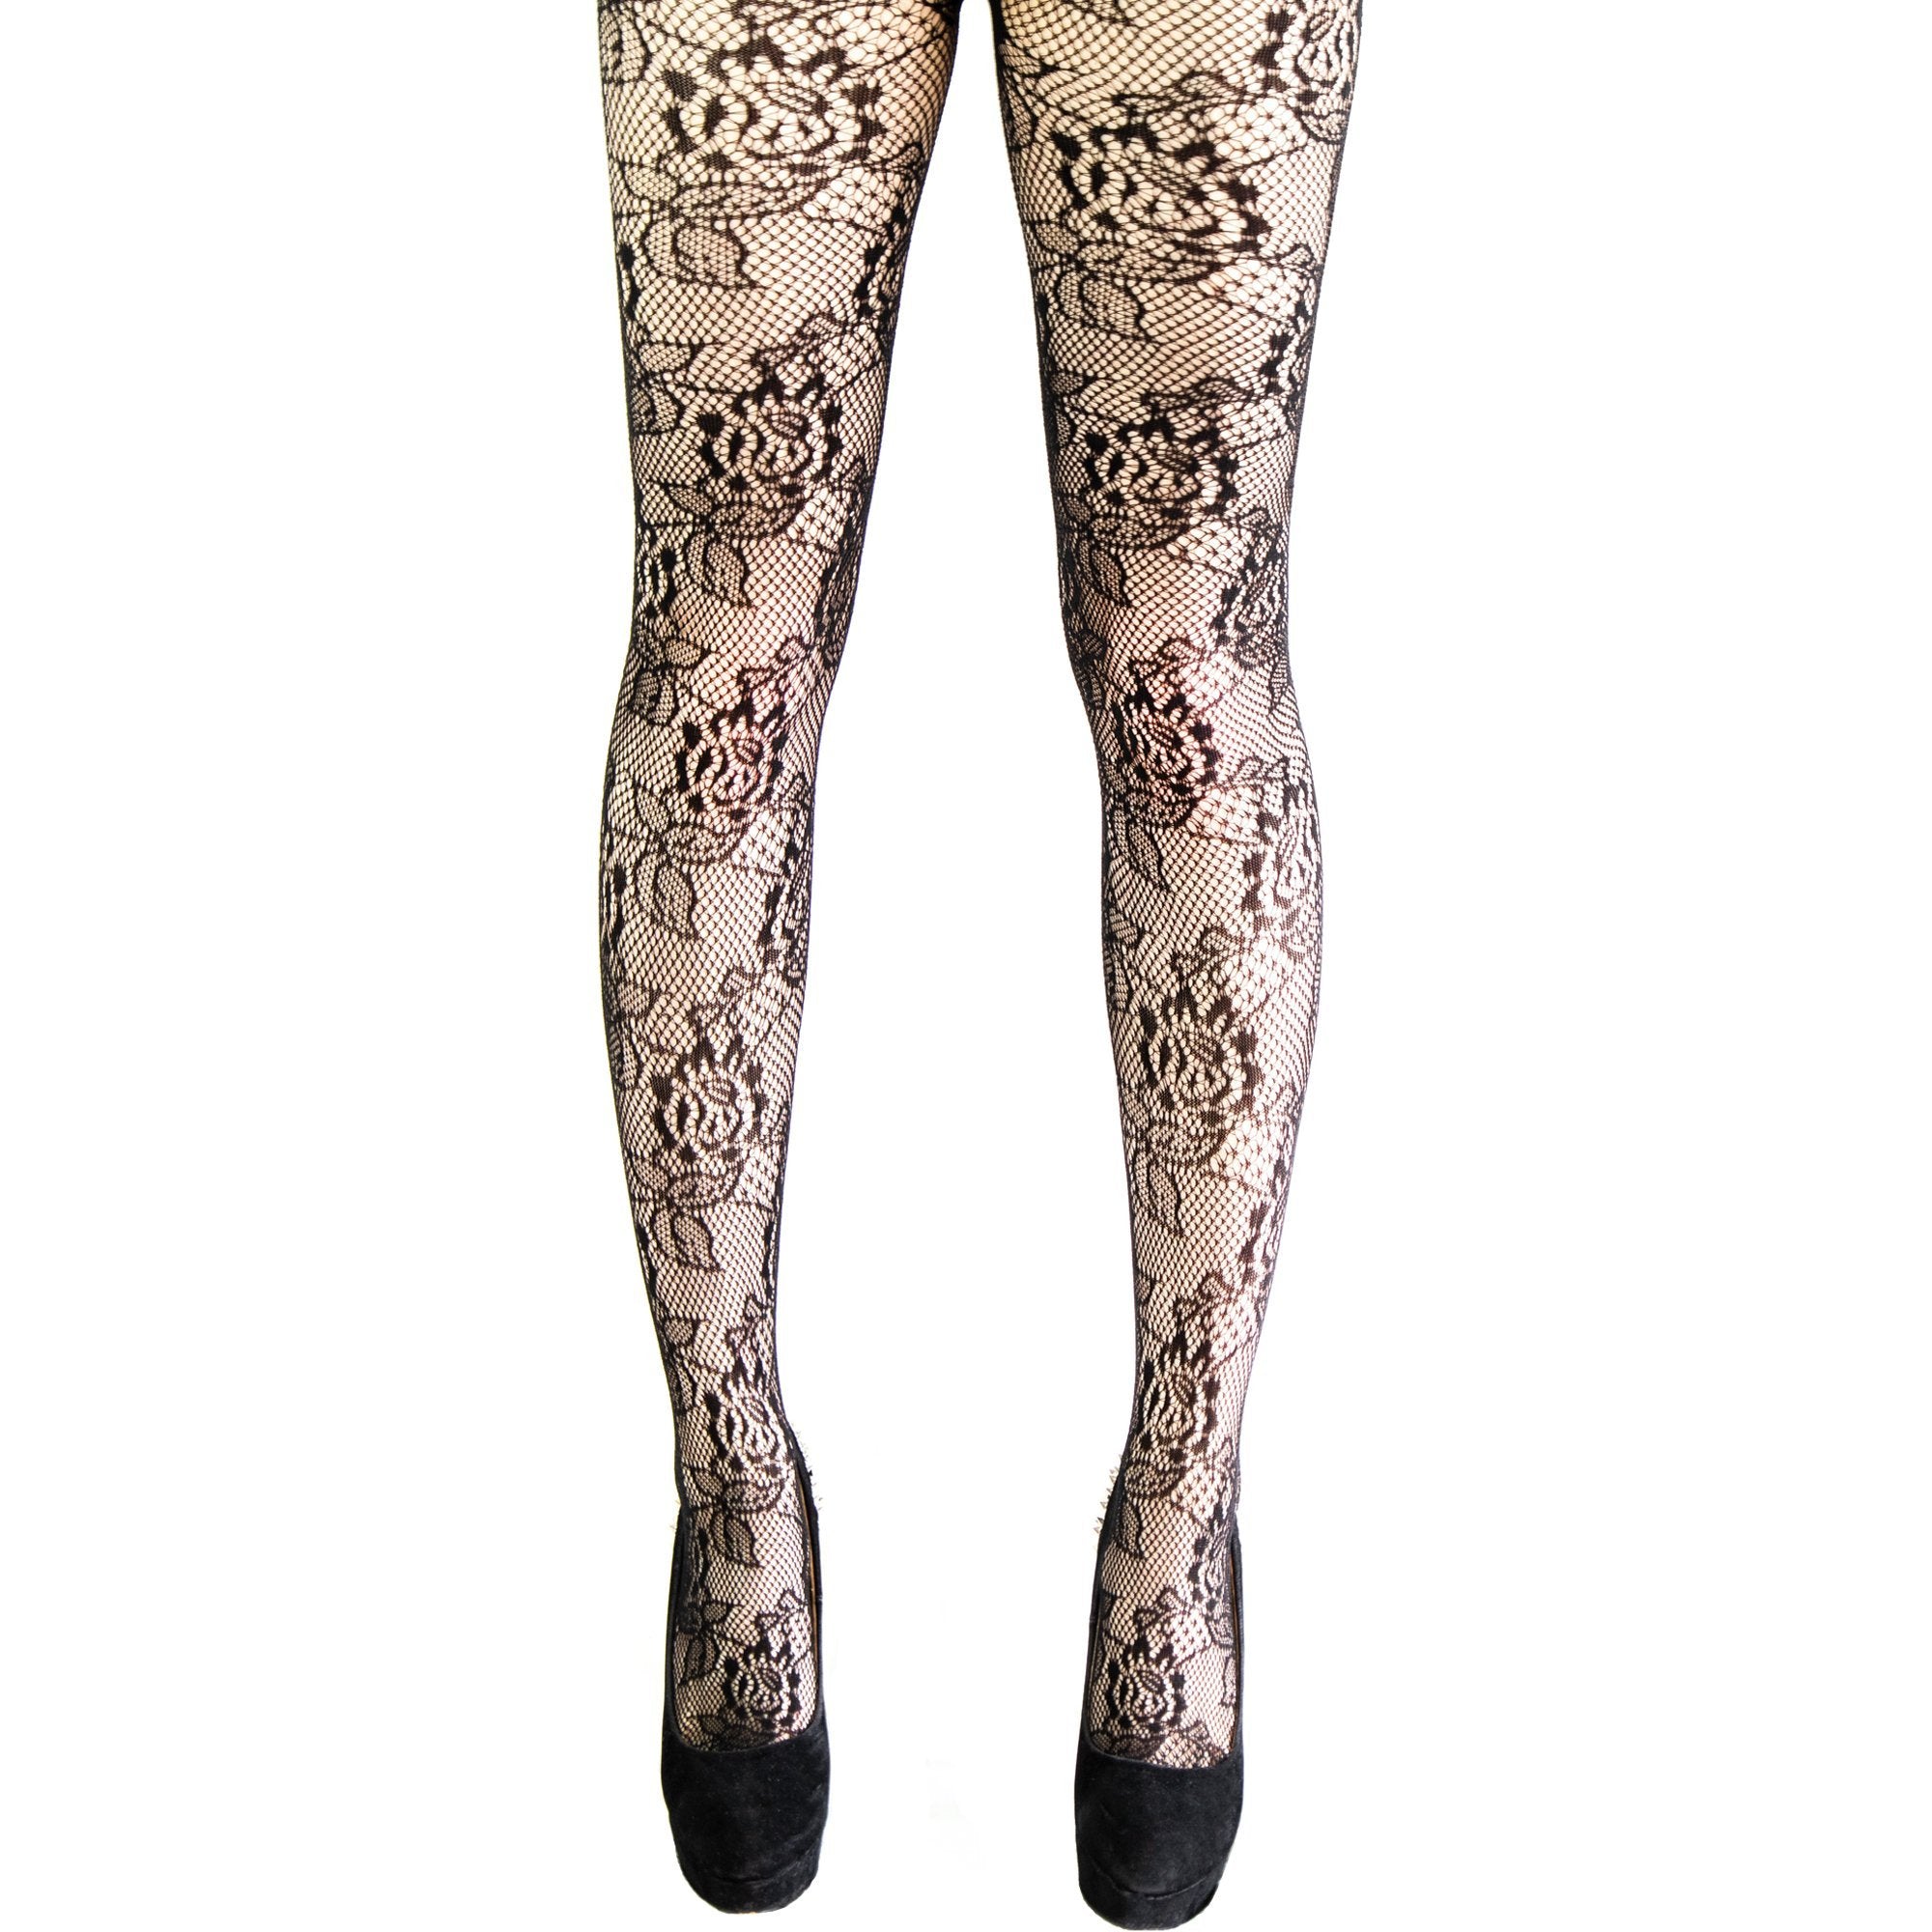 Black Patterned Tights Fishnet Floral Stripe Hearts Lace Women Side Seam  Sexy UK 